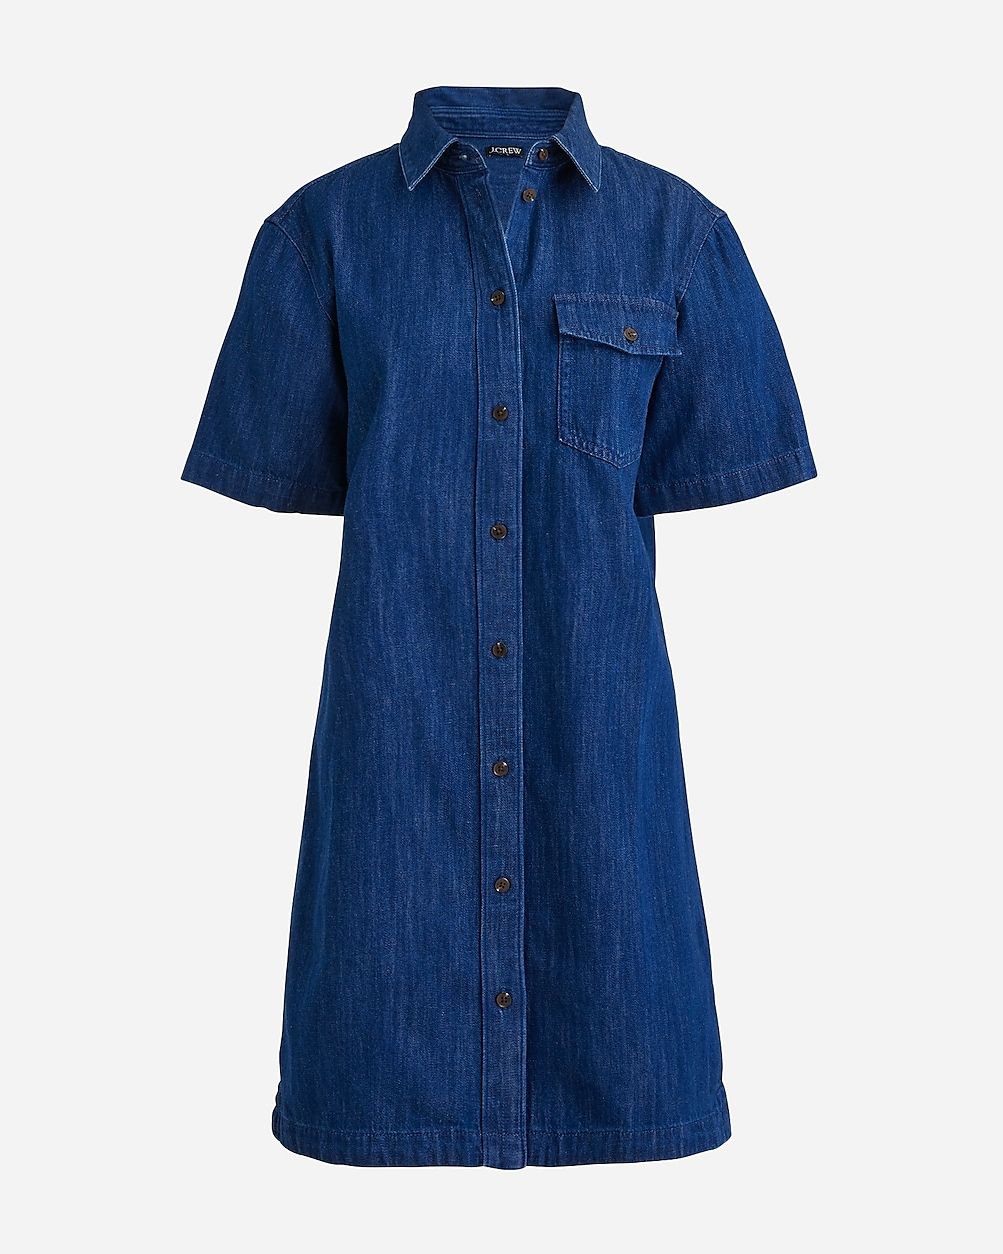 best seller4.6(11 REVIEWS)Short-sleeve chambray dress$132.99$148.00 (10% Off)Extra 30% off sale s... | J.Crew US